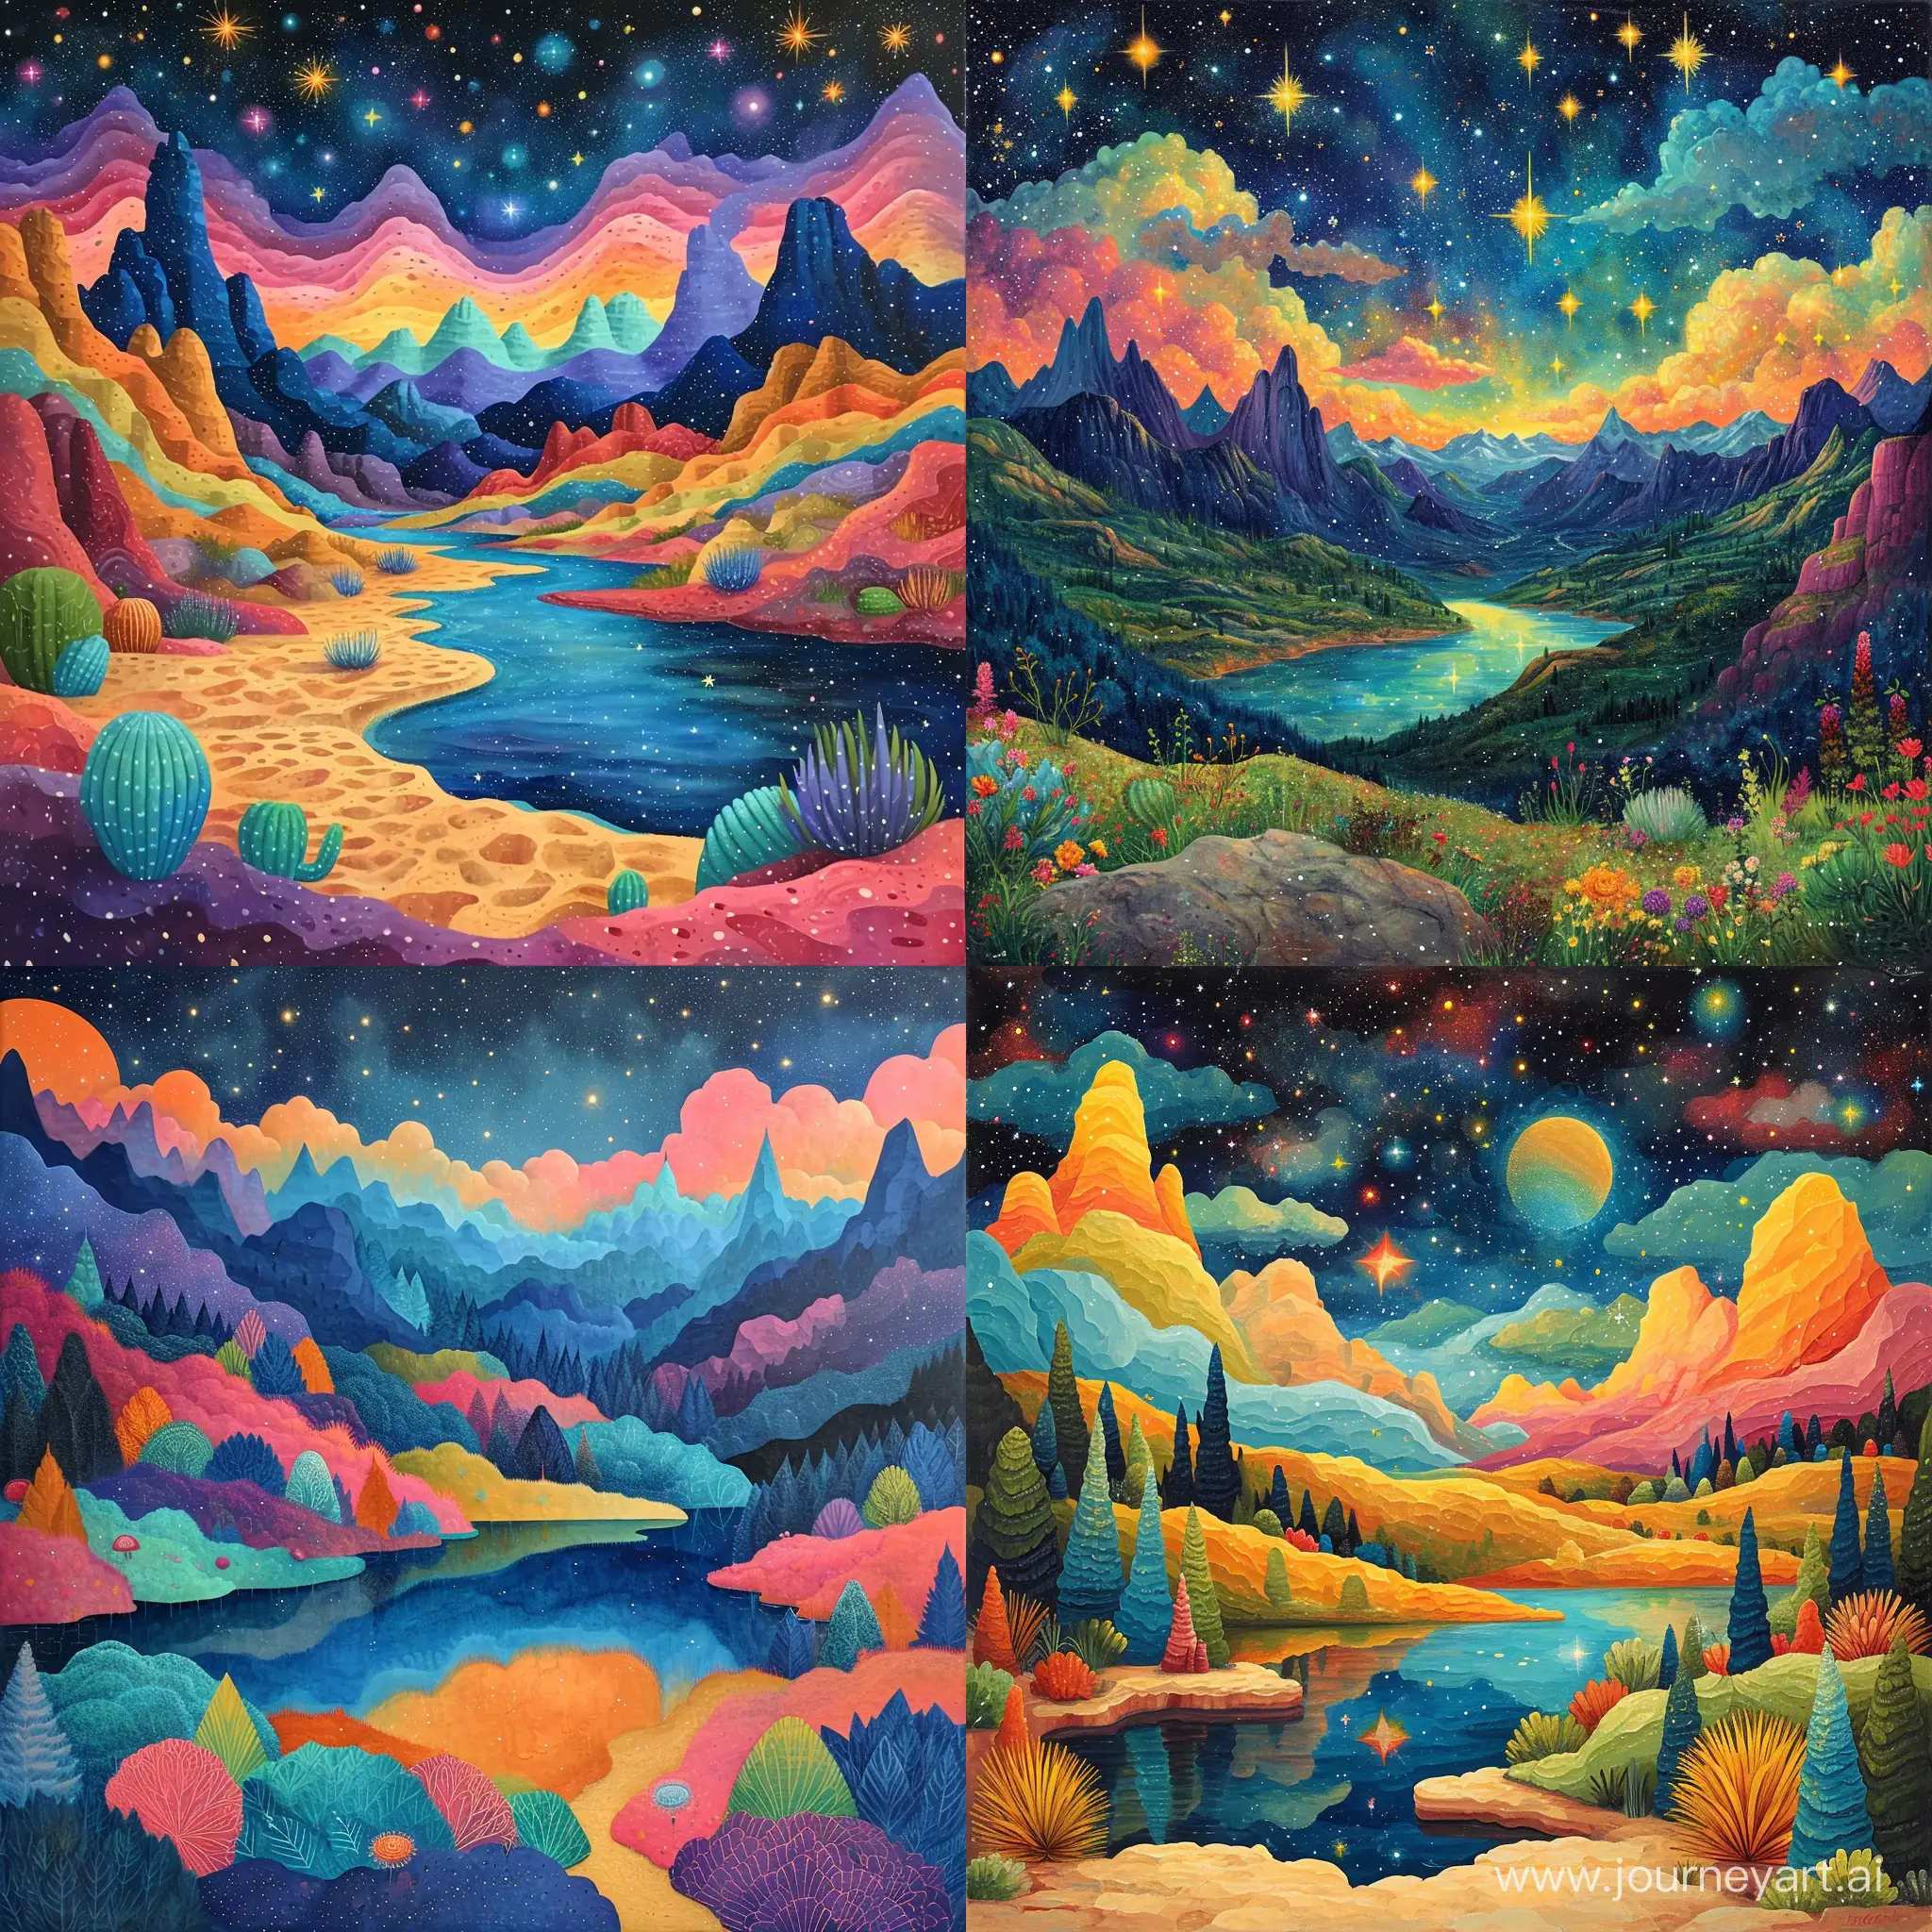 A painting of a colorful, fantastical landscape with mountains, a lake, and stars in the sky, --s 500